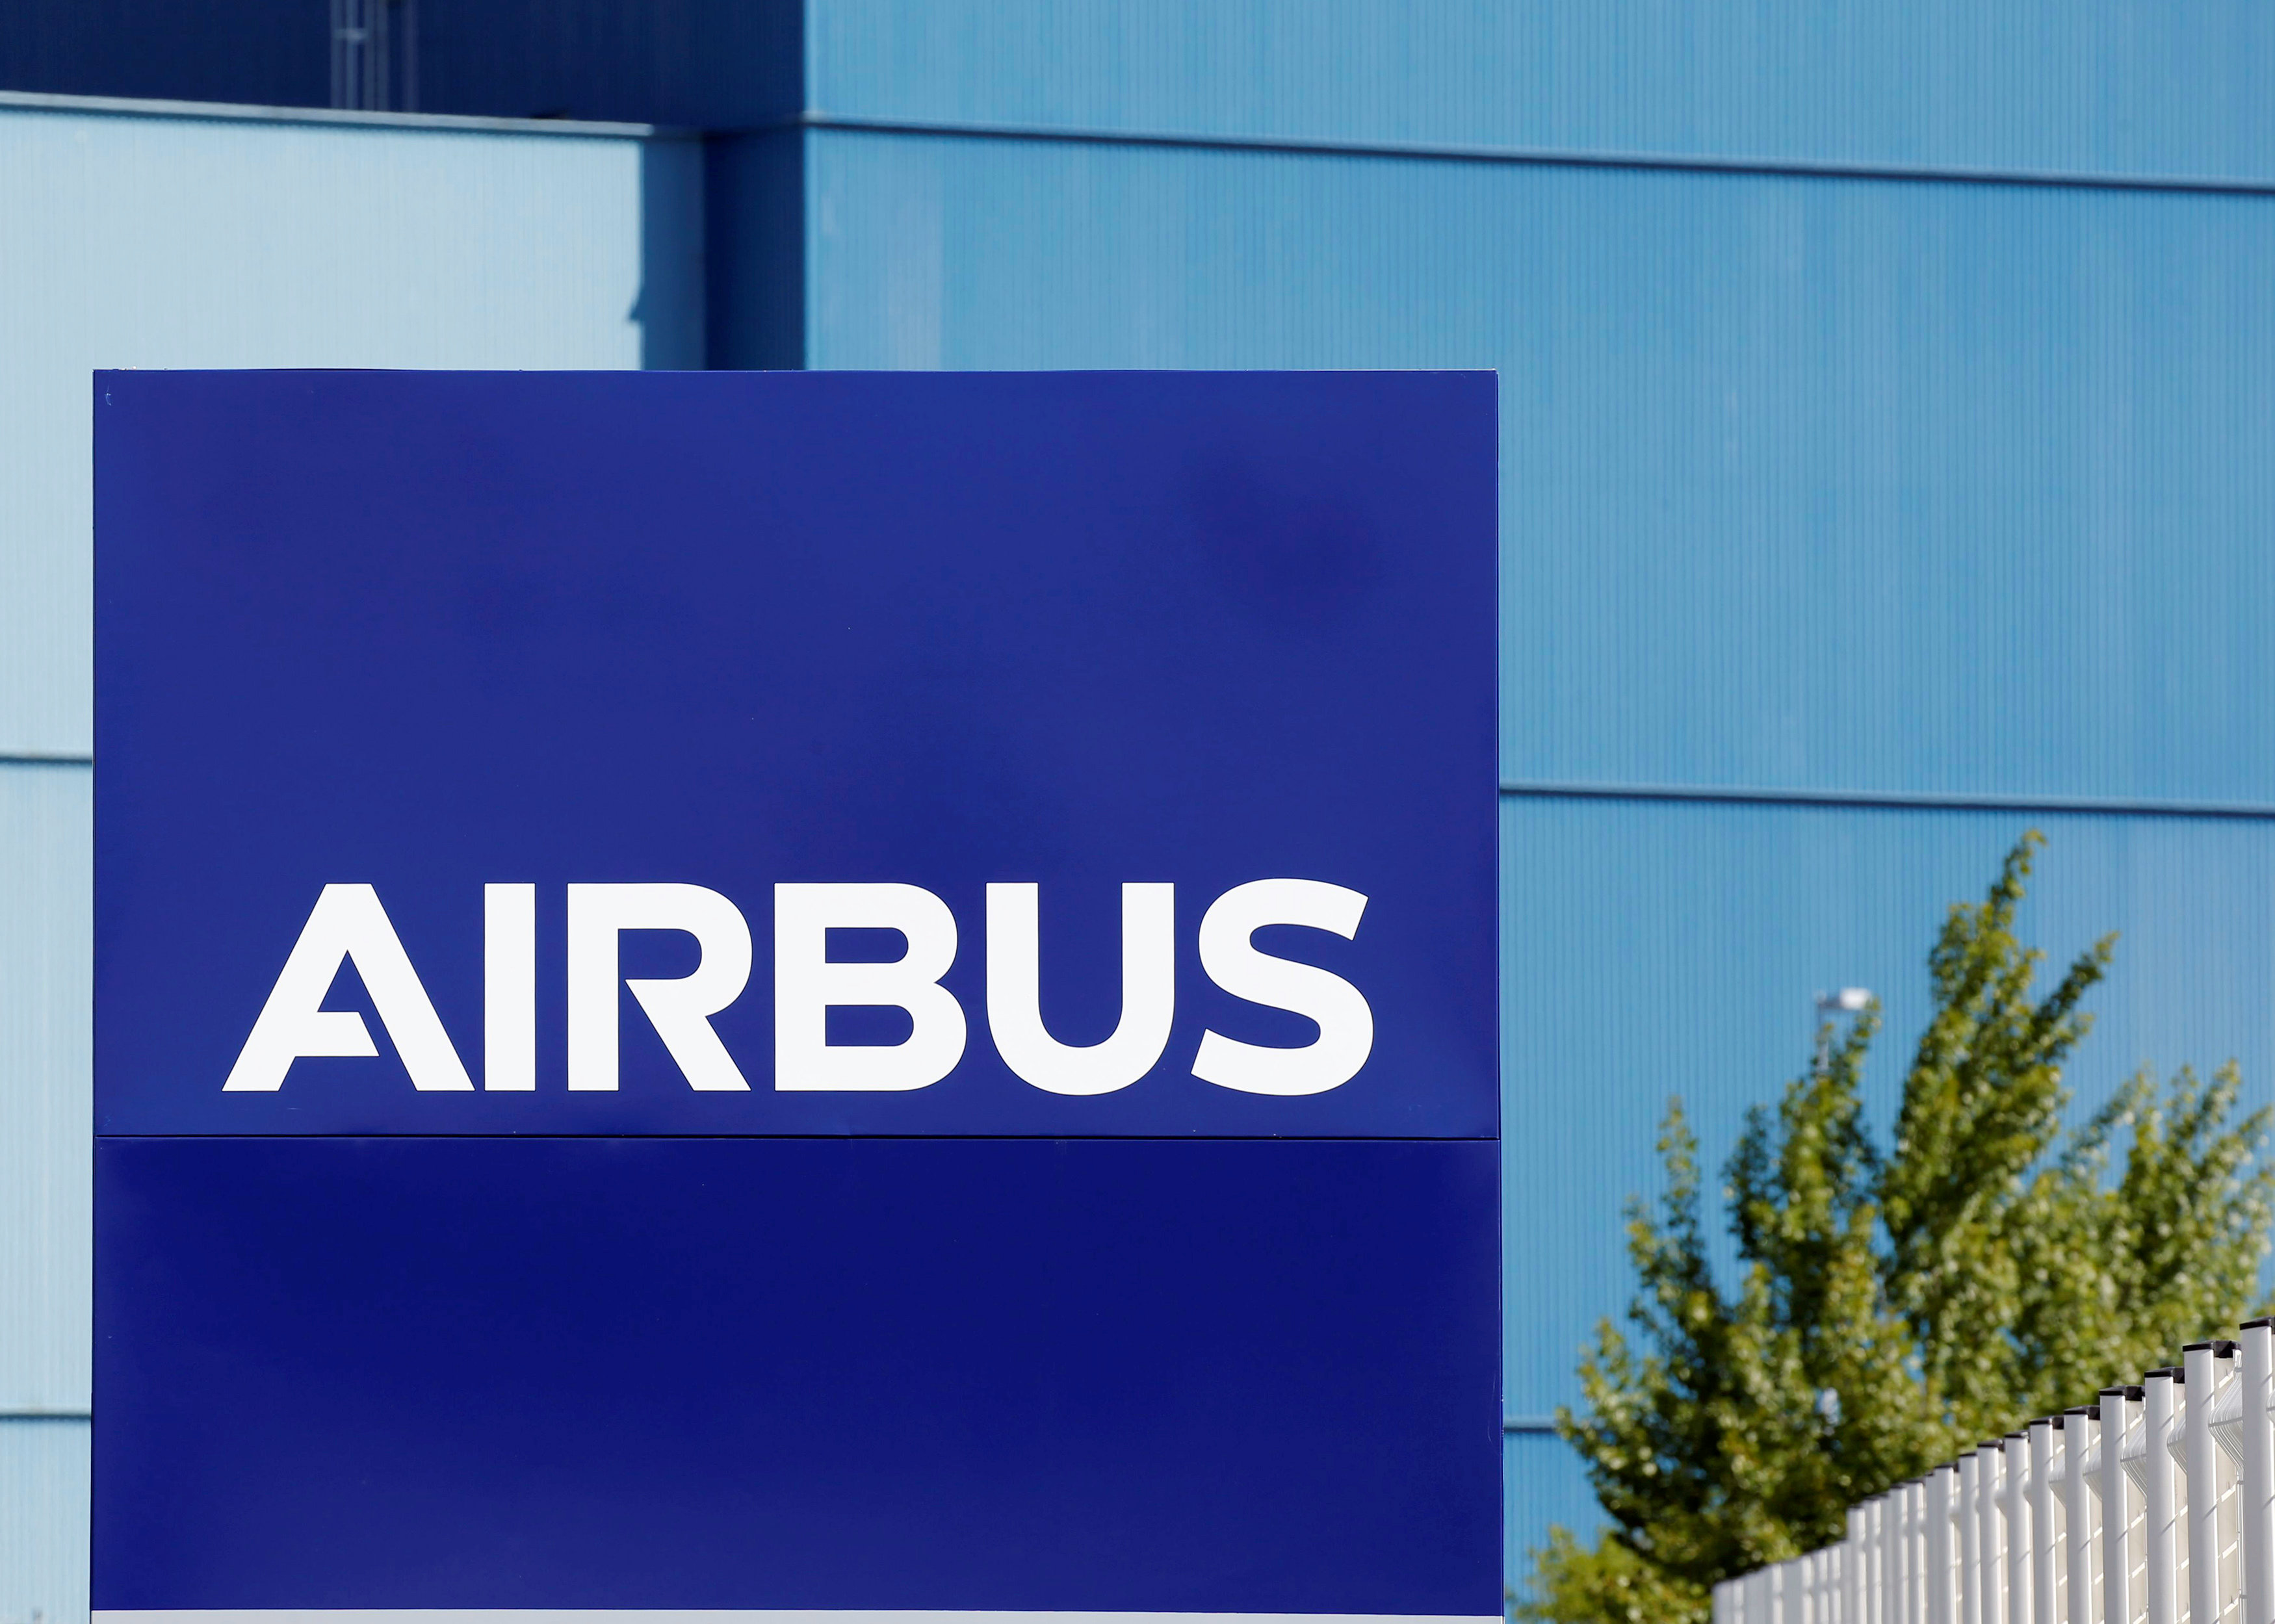 Airbus wins 2017 order race after last-minute sales spree